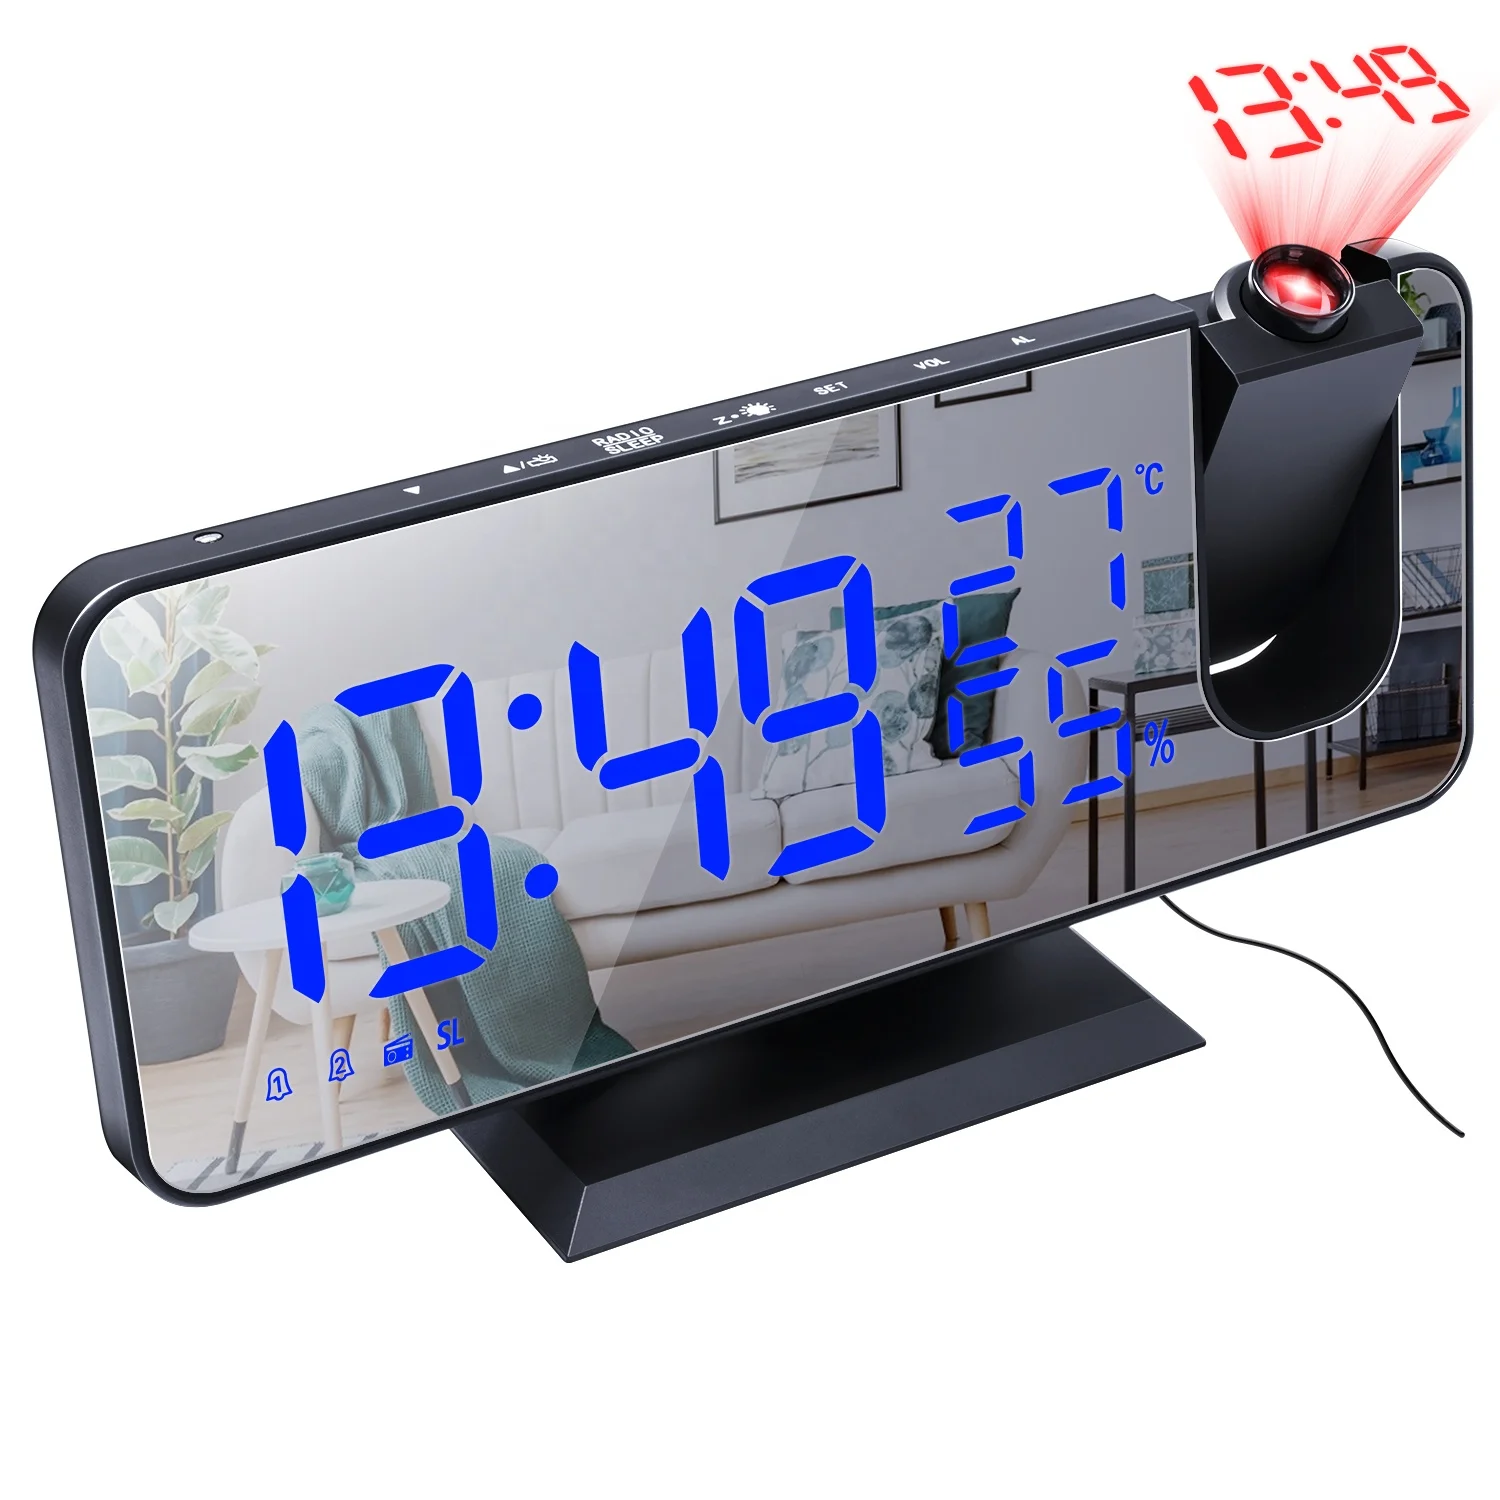 

2021 New Digital Projection Alarm Clock Wall Decoration Table Clocks With Radio Projector Thermometer Humidity Phone Charger, Any pantone color, led color, customized logo, package all available